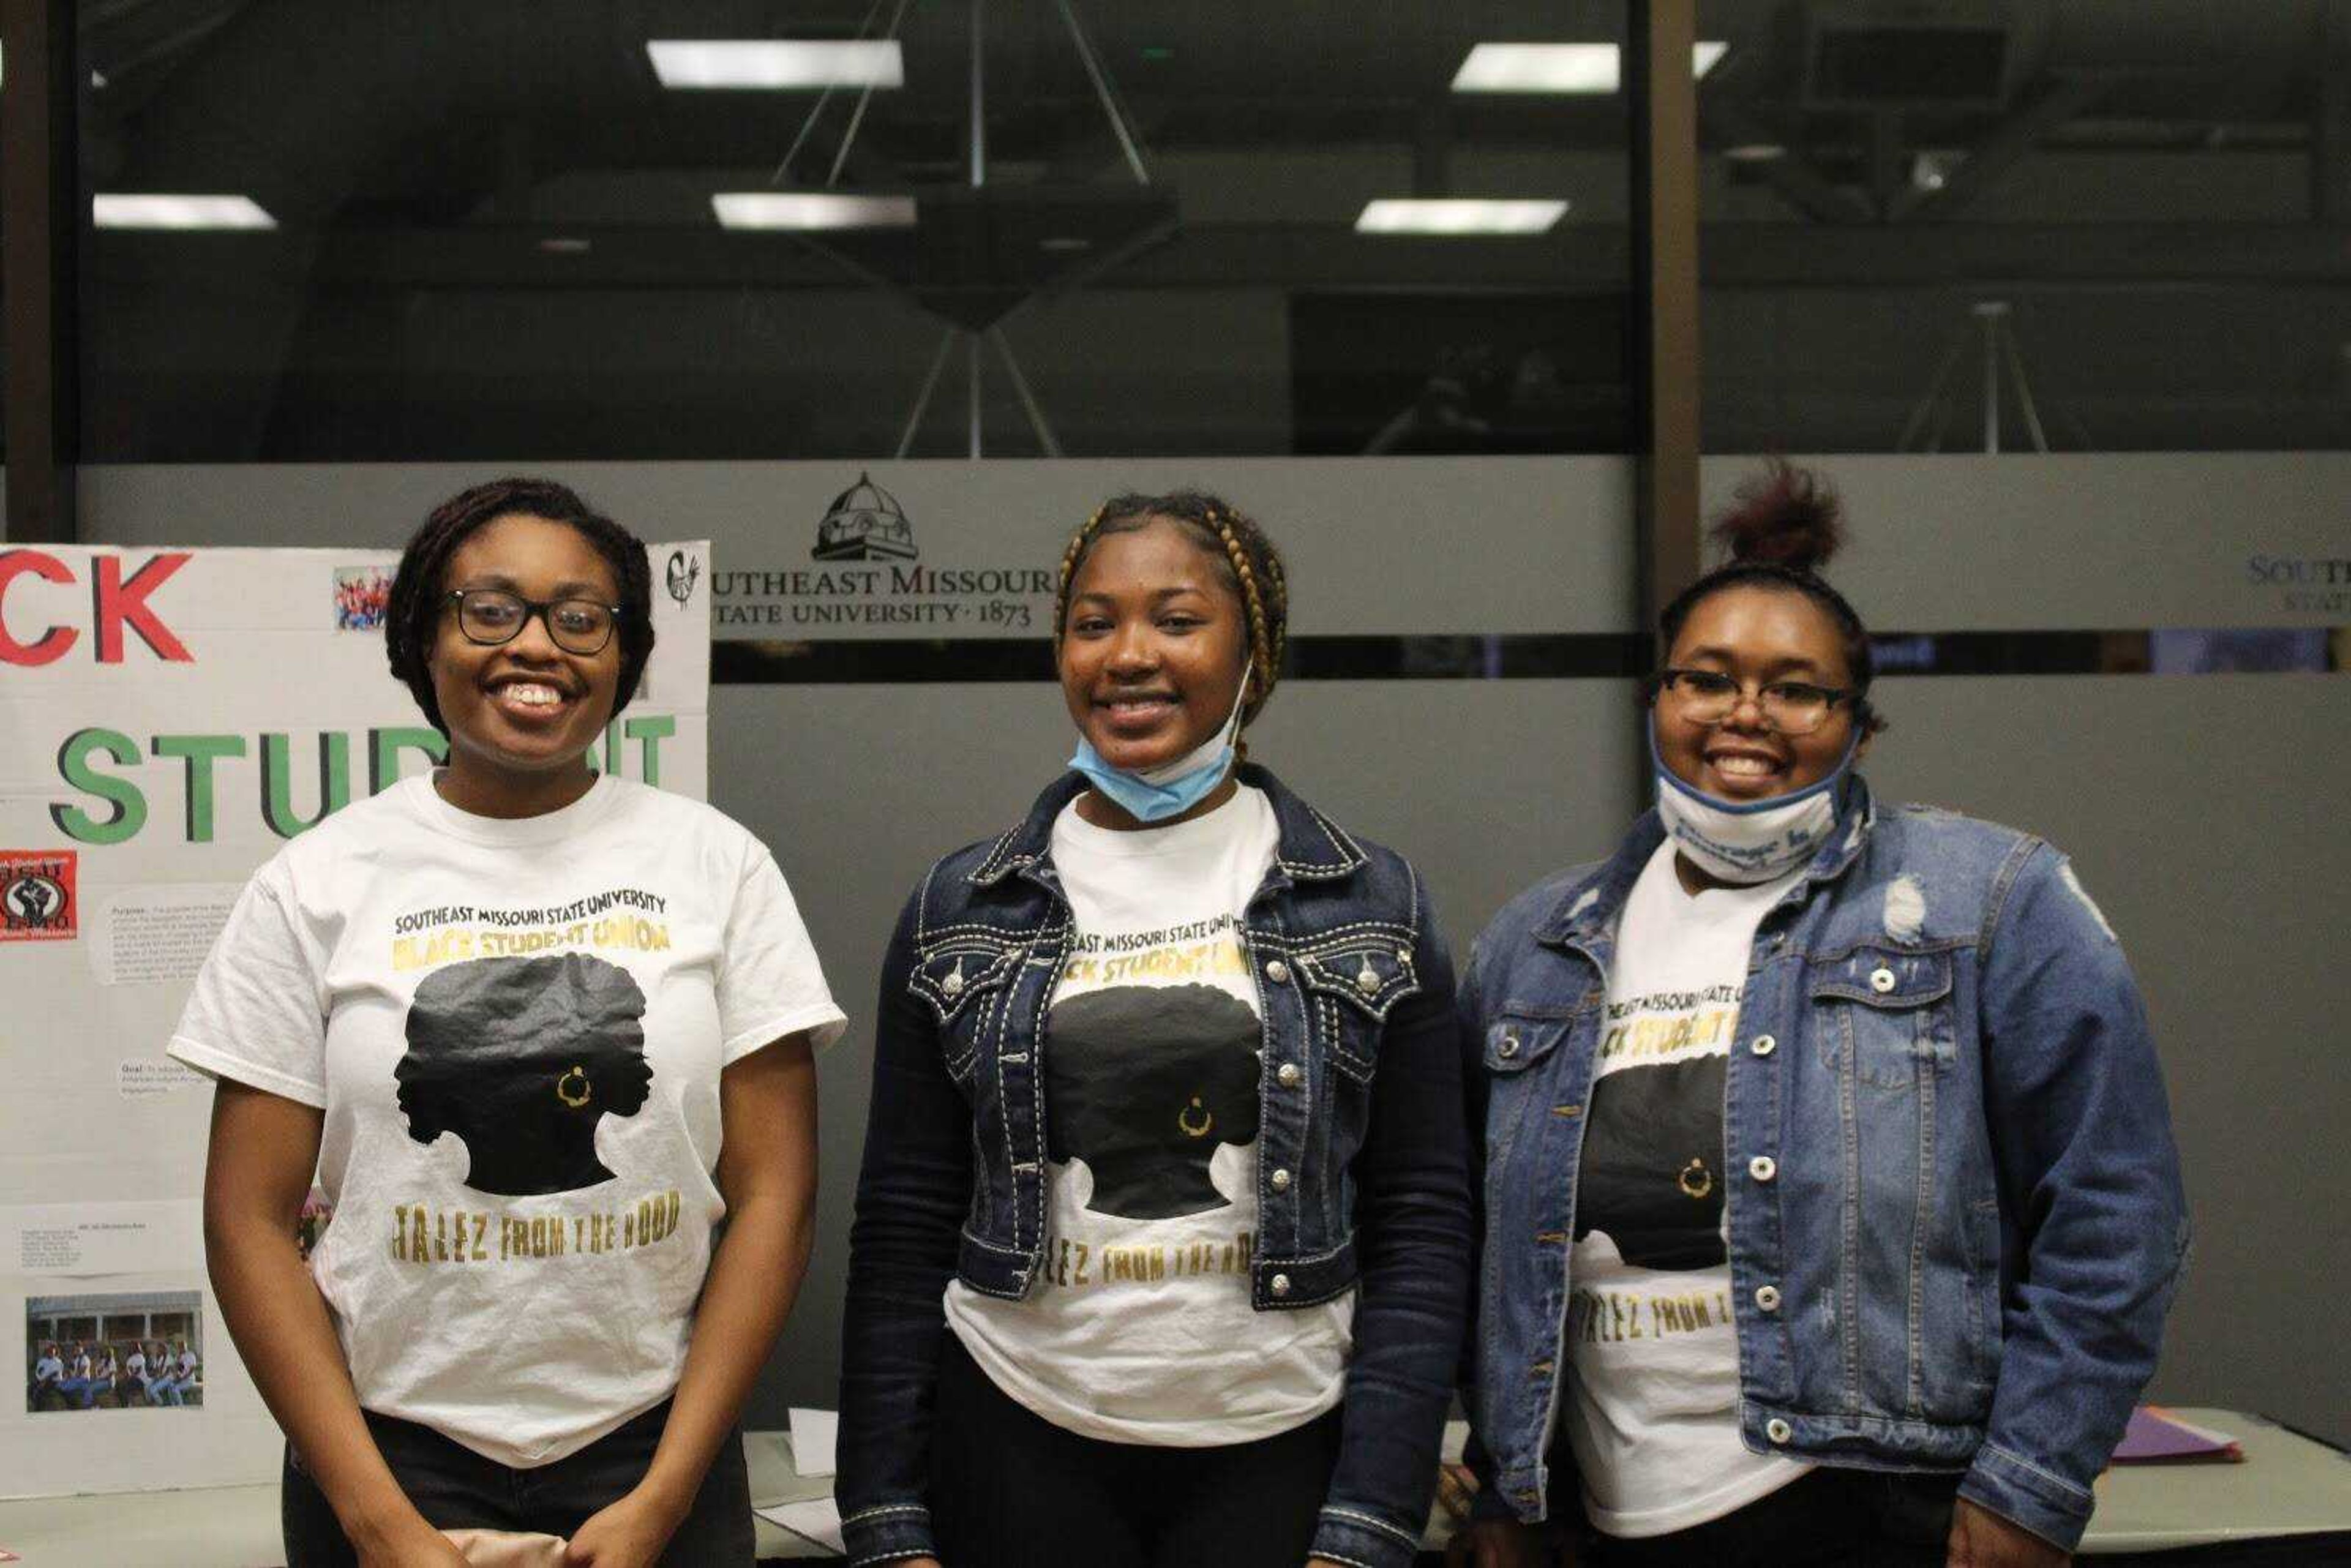 Secretary Jessica Pierre, treasurer Serenity Wilson and president Zambreah Butler, executive members of the Black Student Union, stand in front of their poster advertising the Black Student Union at The University Center on campus. The BSU promotes and recognizes Black and minority voices on campus.